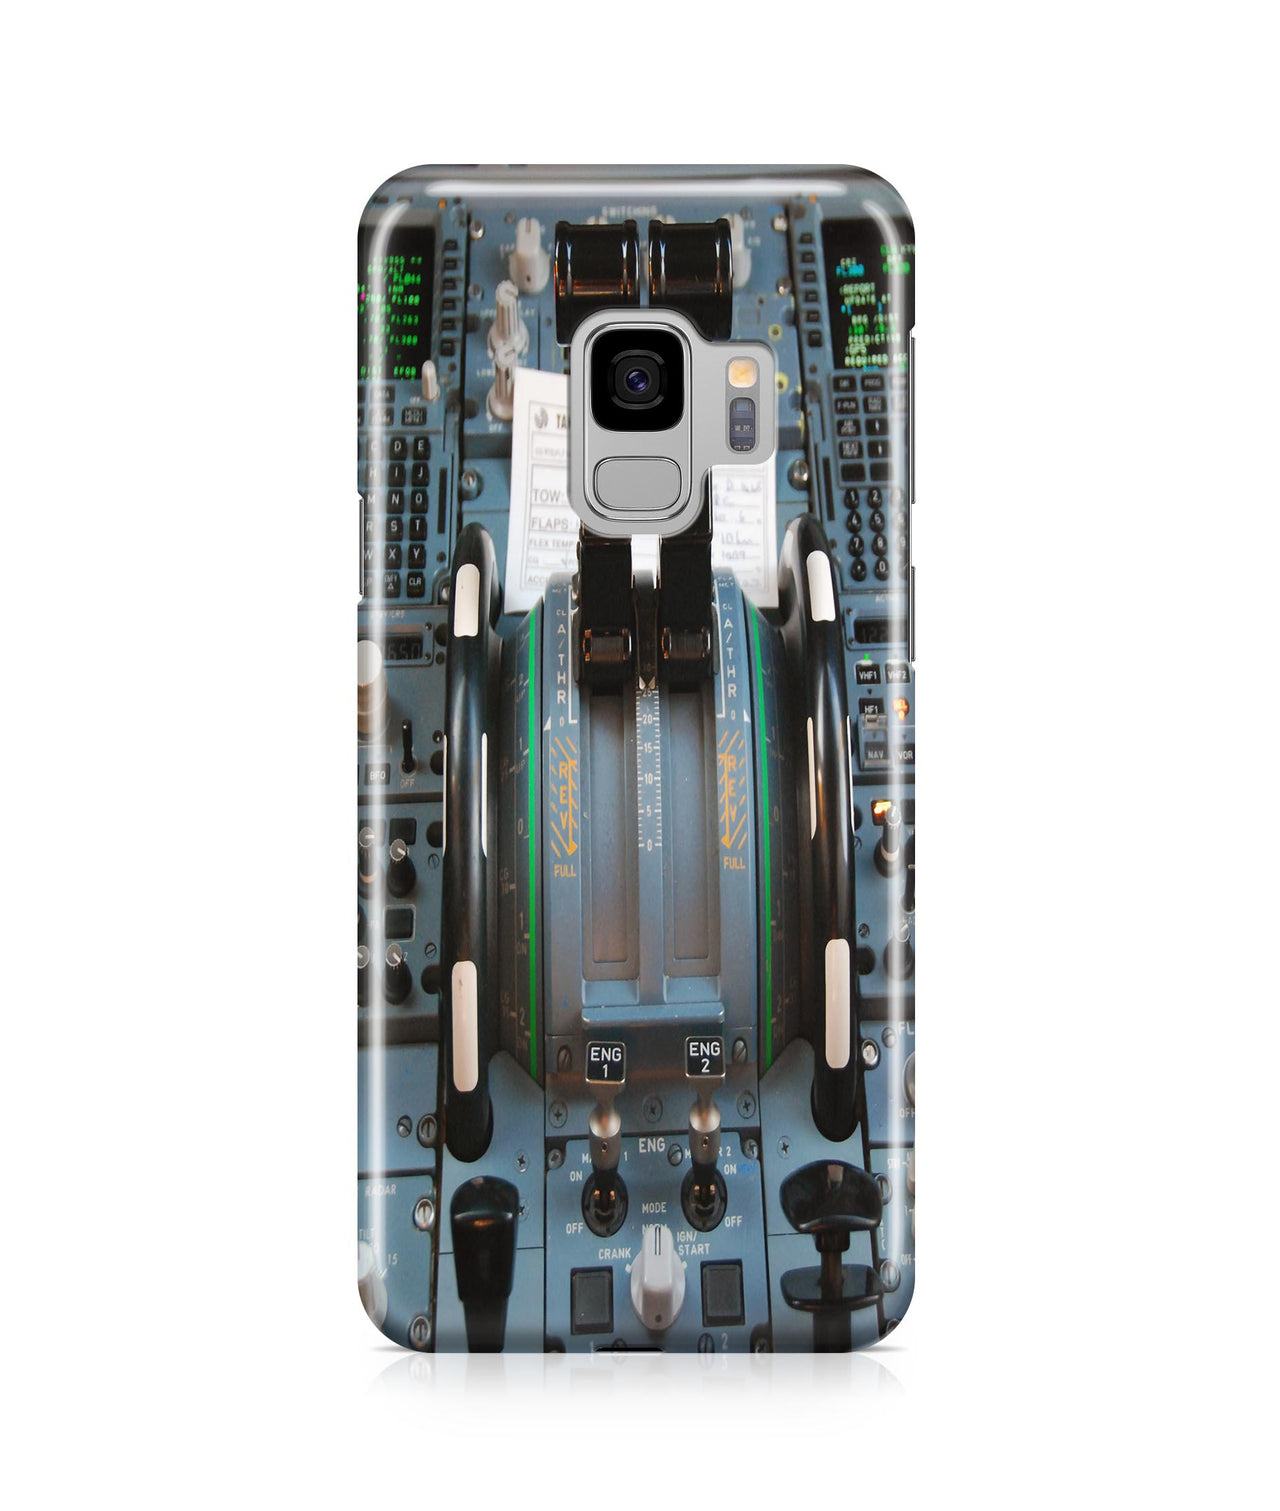 Airbus A320 Cockpit Printed Samsung J Cases